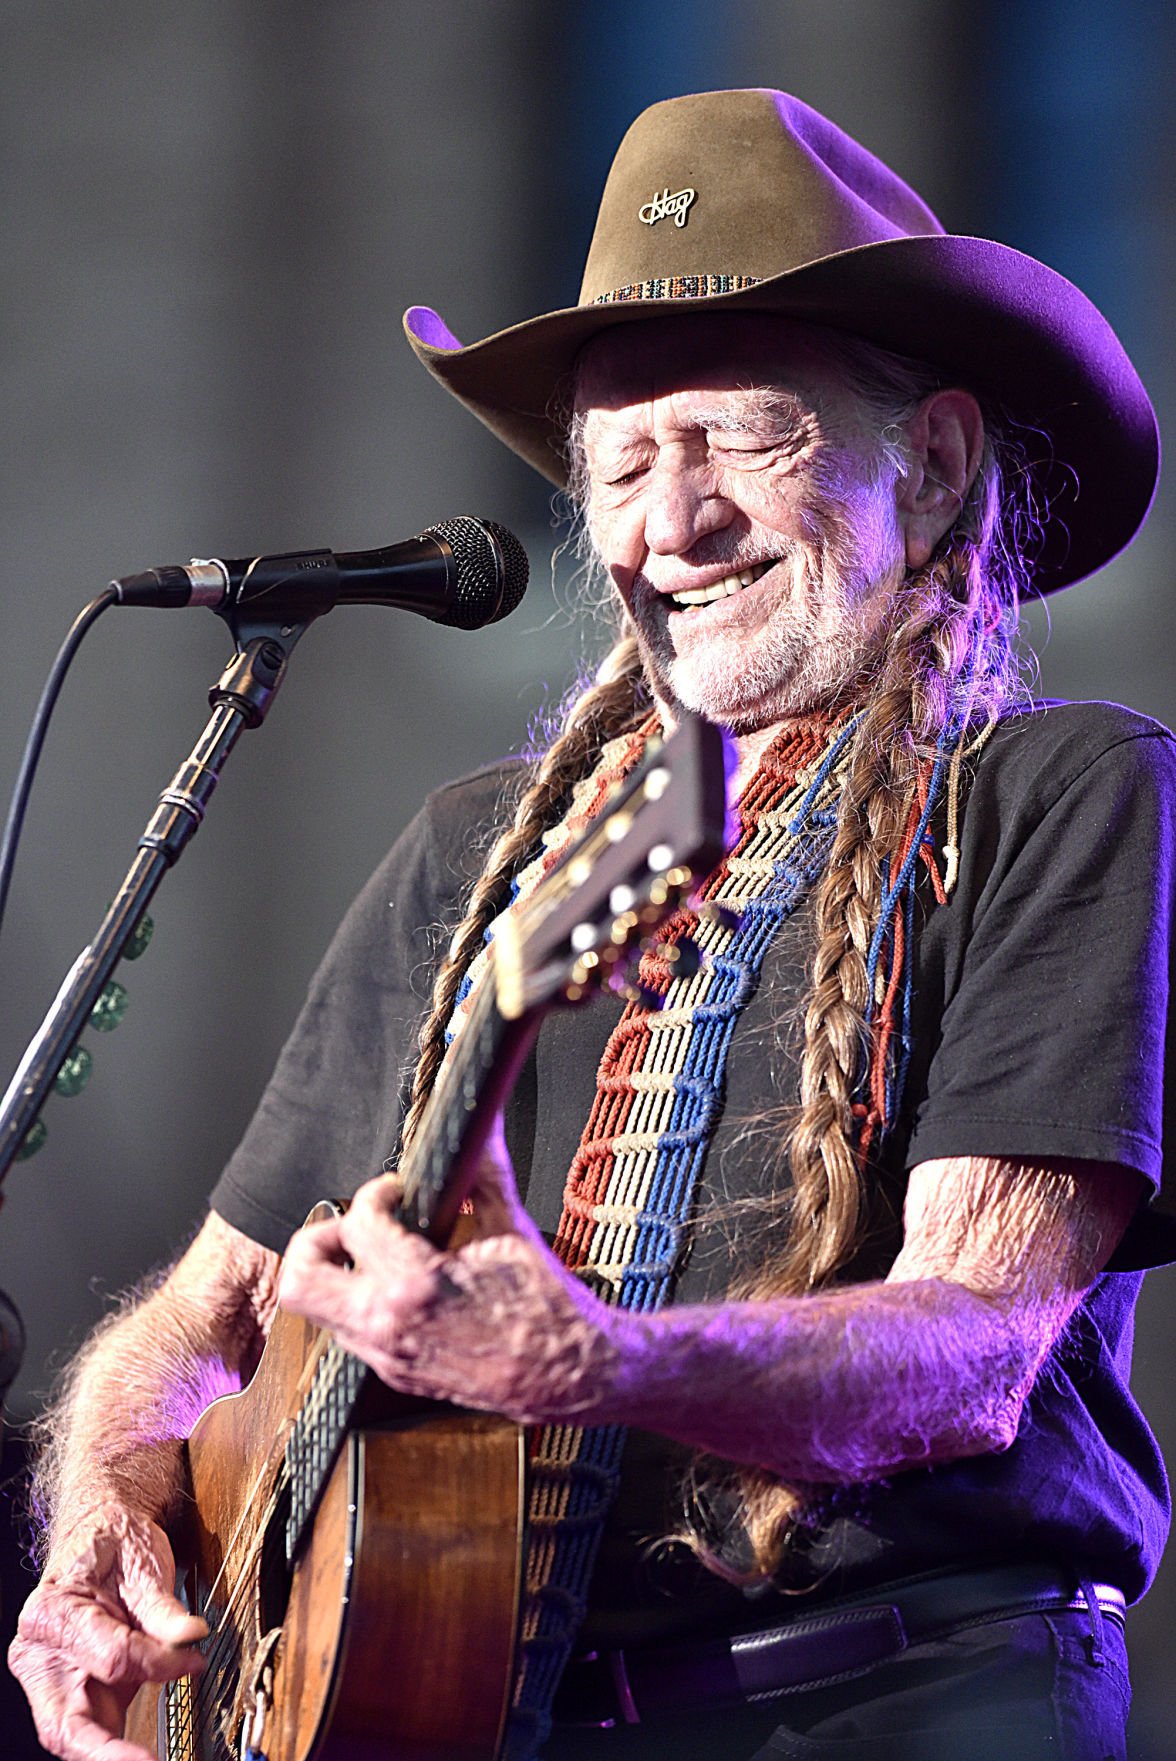 Willie Nelson brings the heat to Hard Rock | Local news